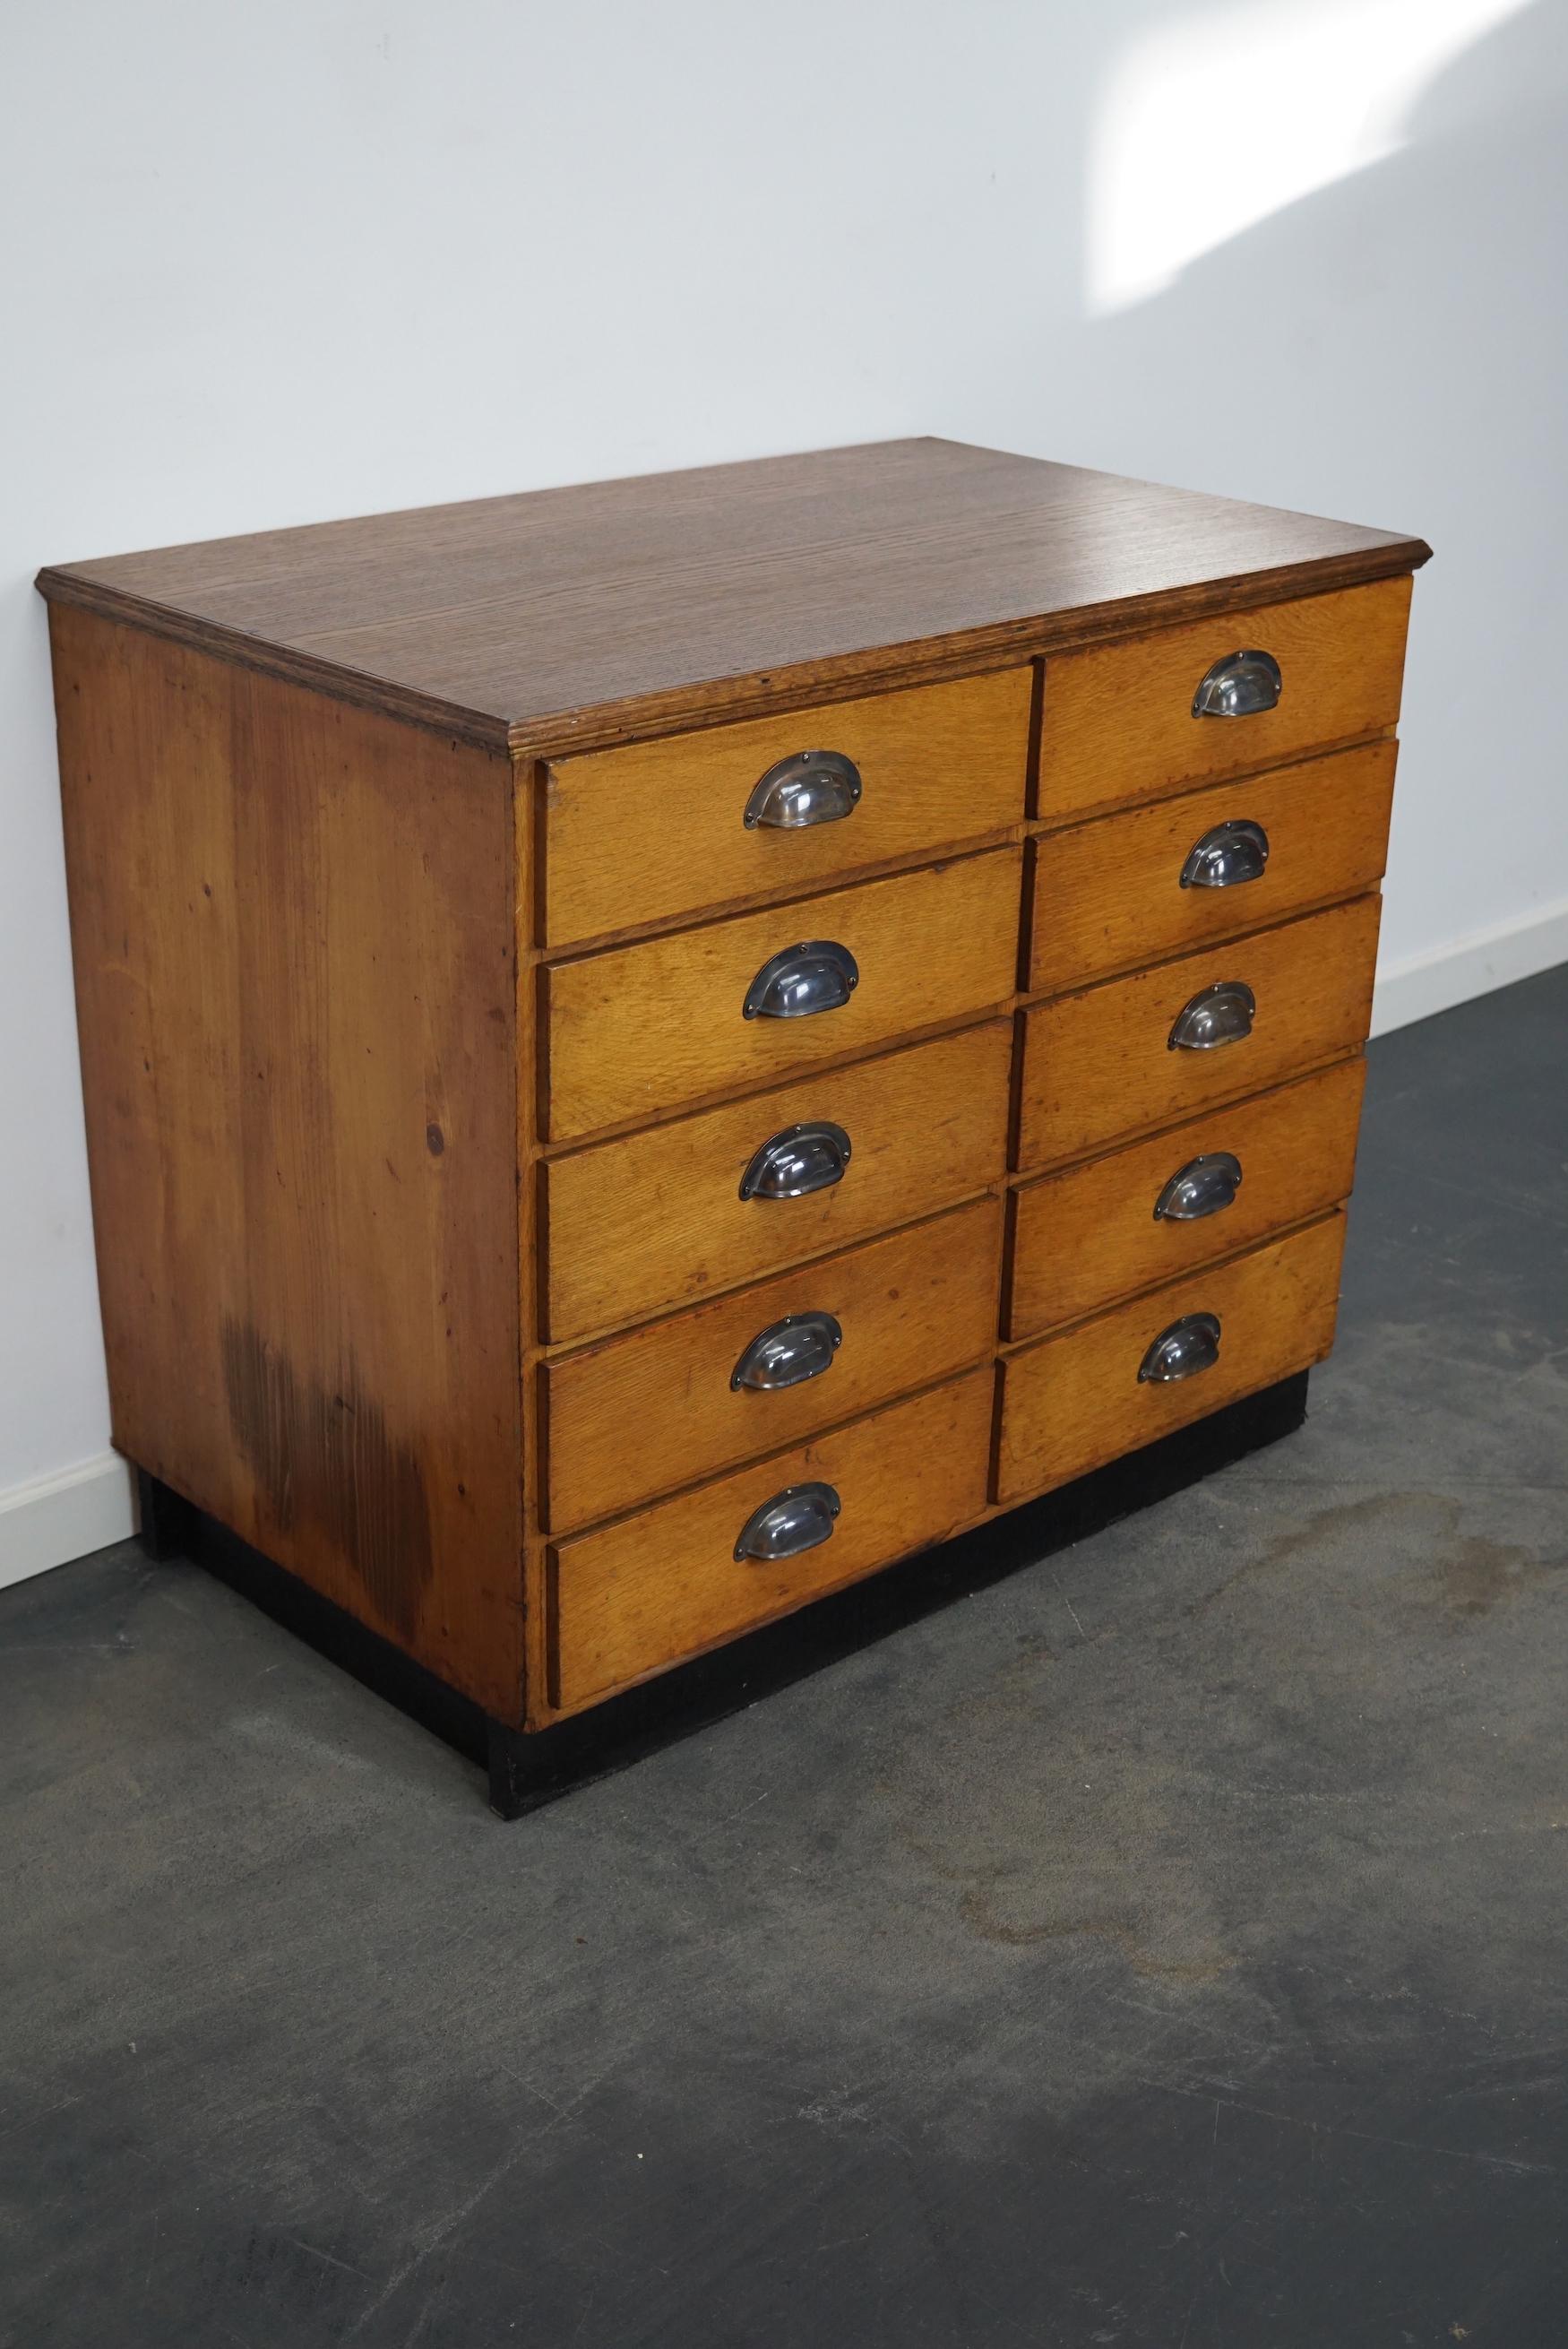 Early 20th Century German Oak / Pine Apothecary Cabinet or Bank of Drawers, Mid 20th Century